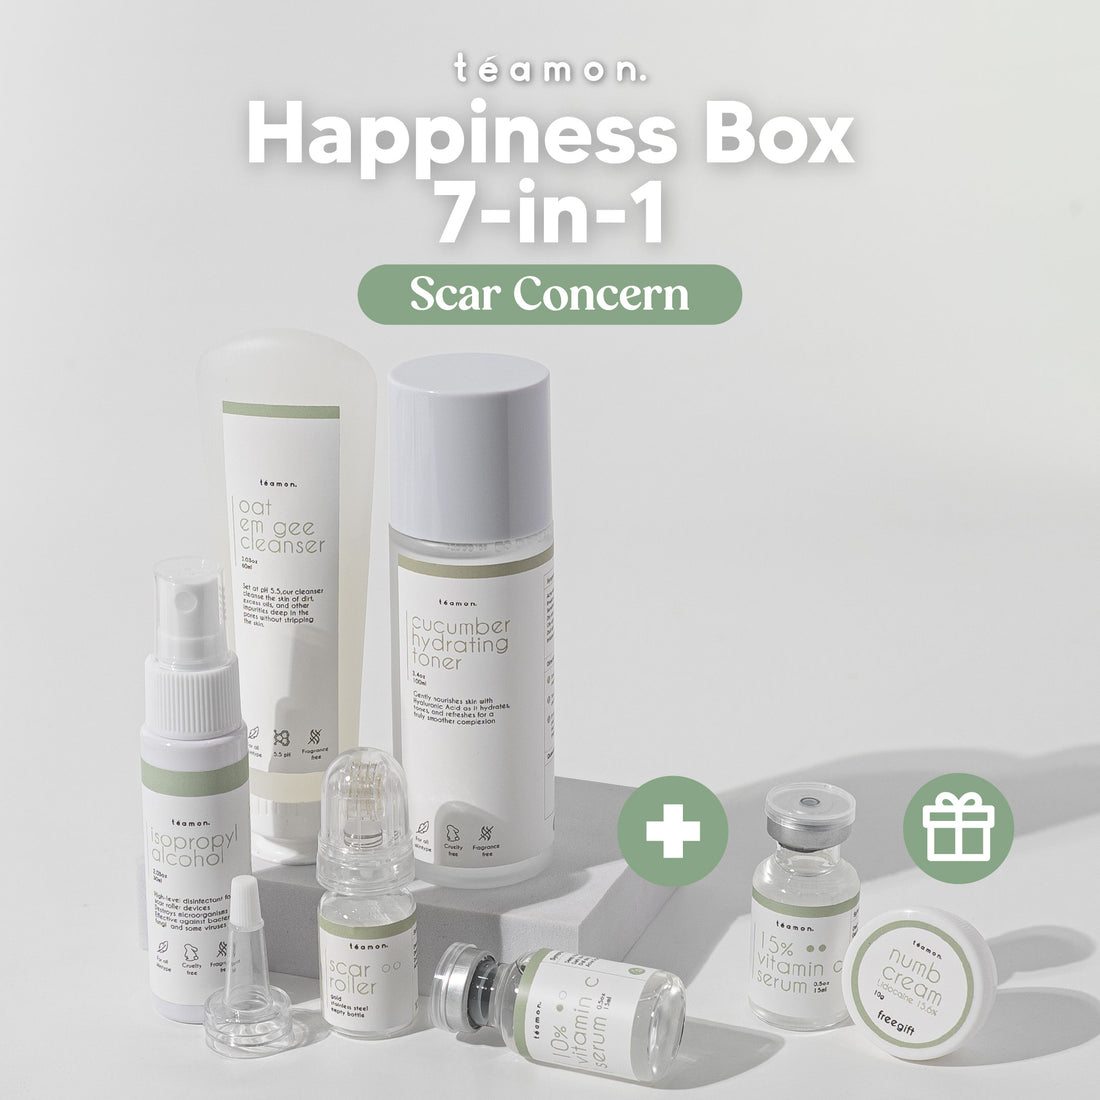 Happiness Box 7in1 - Scar Concern